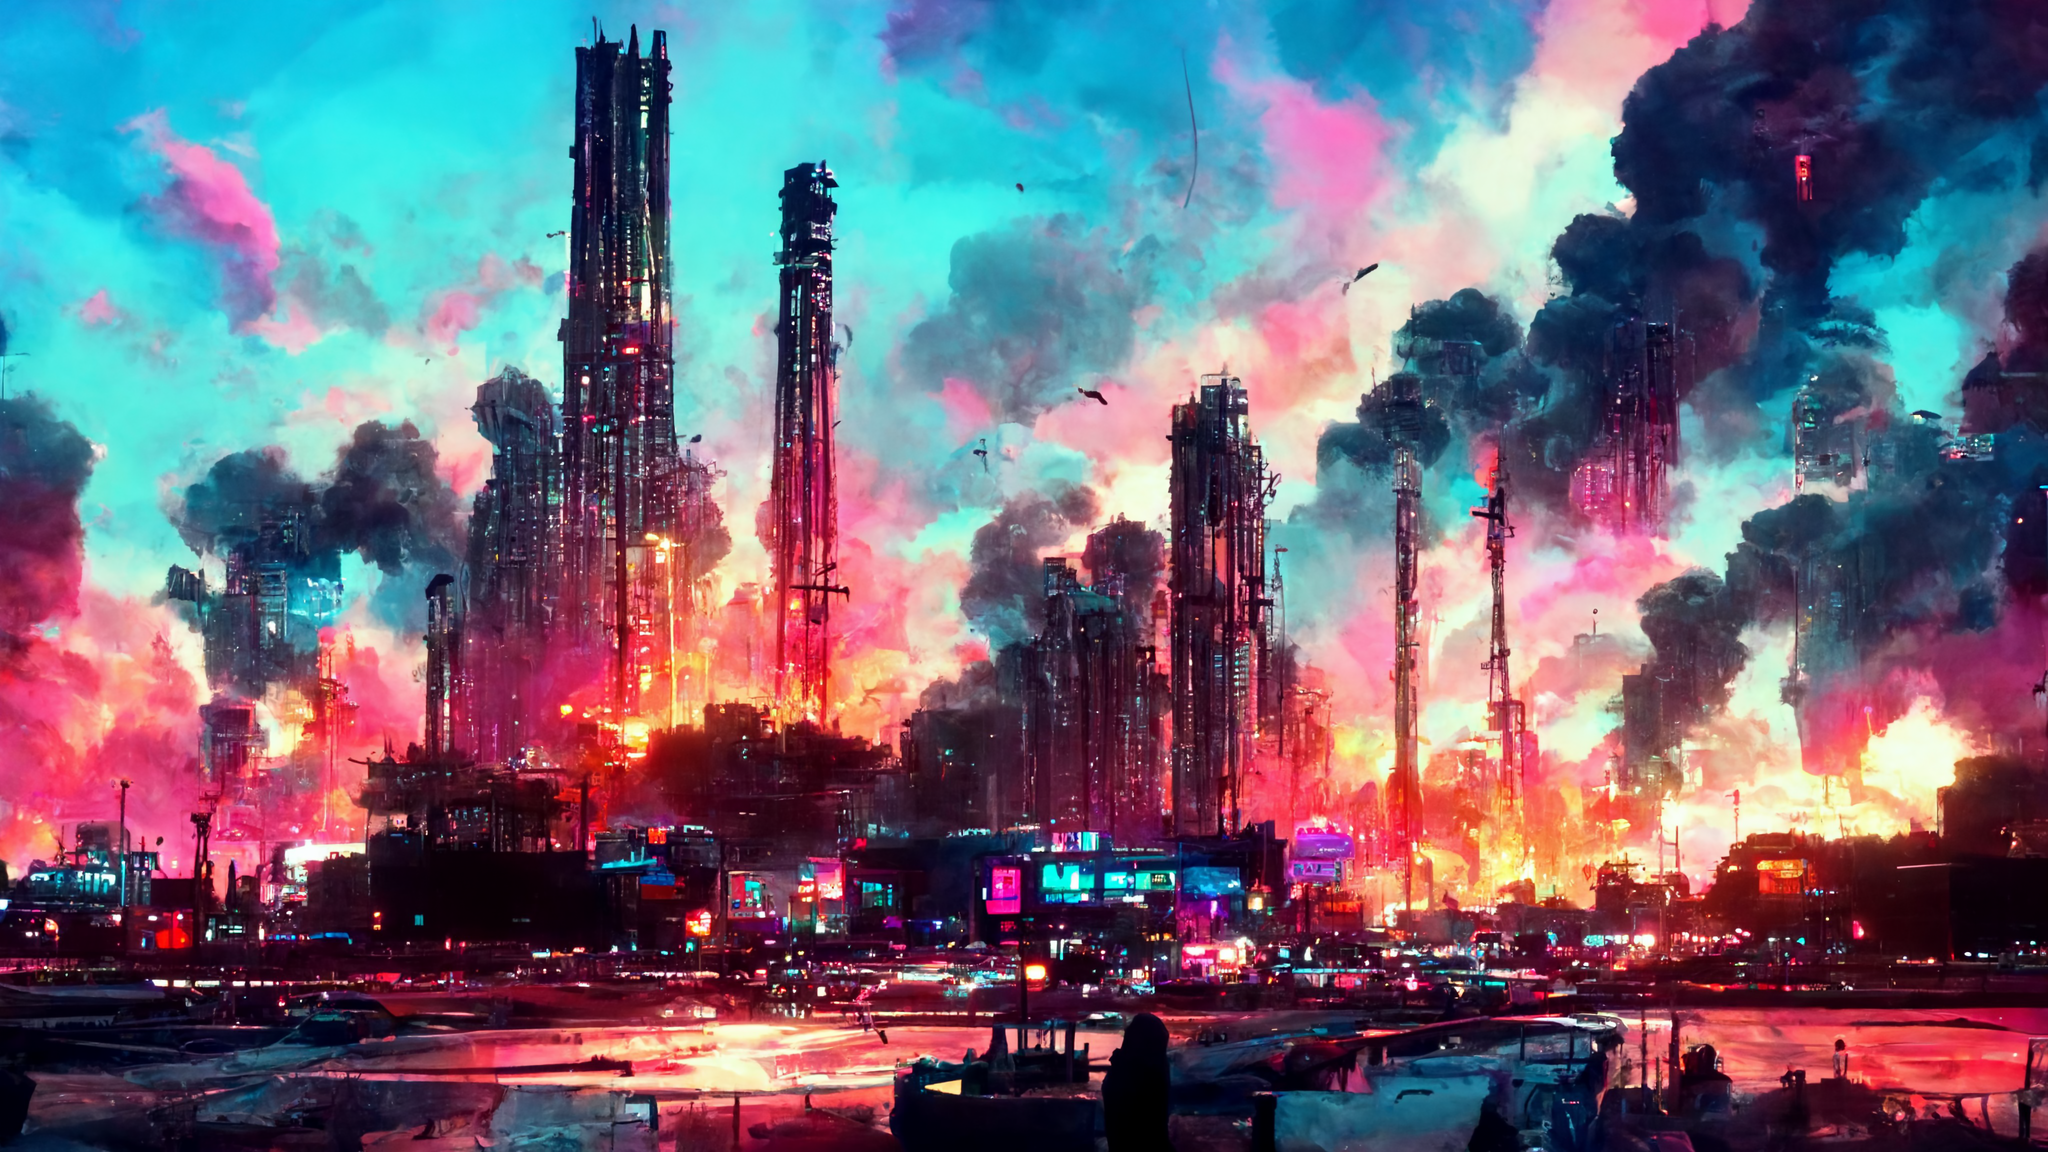 Burning City Cyberpunk Bright Evening Building Clouds Pink Red 2048x1152